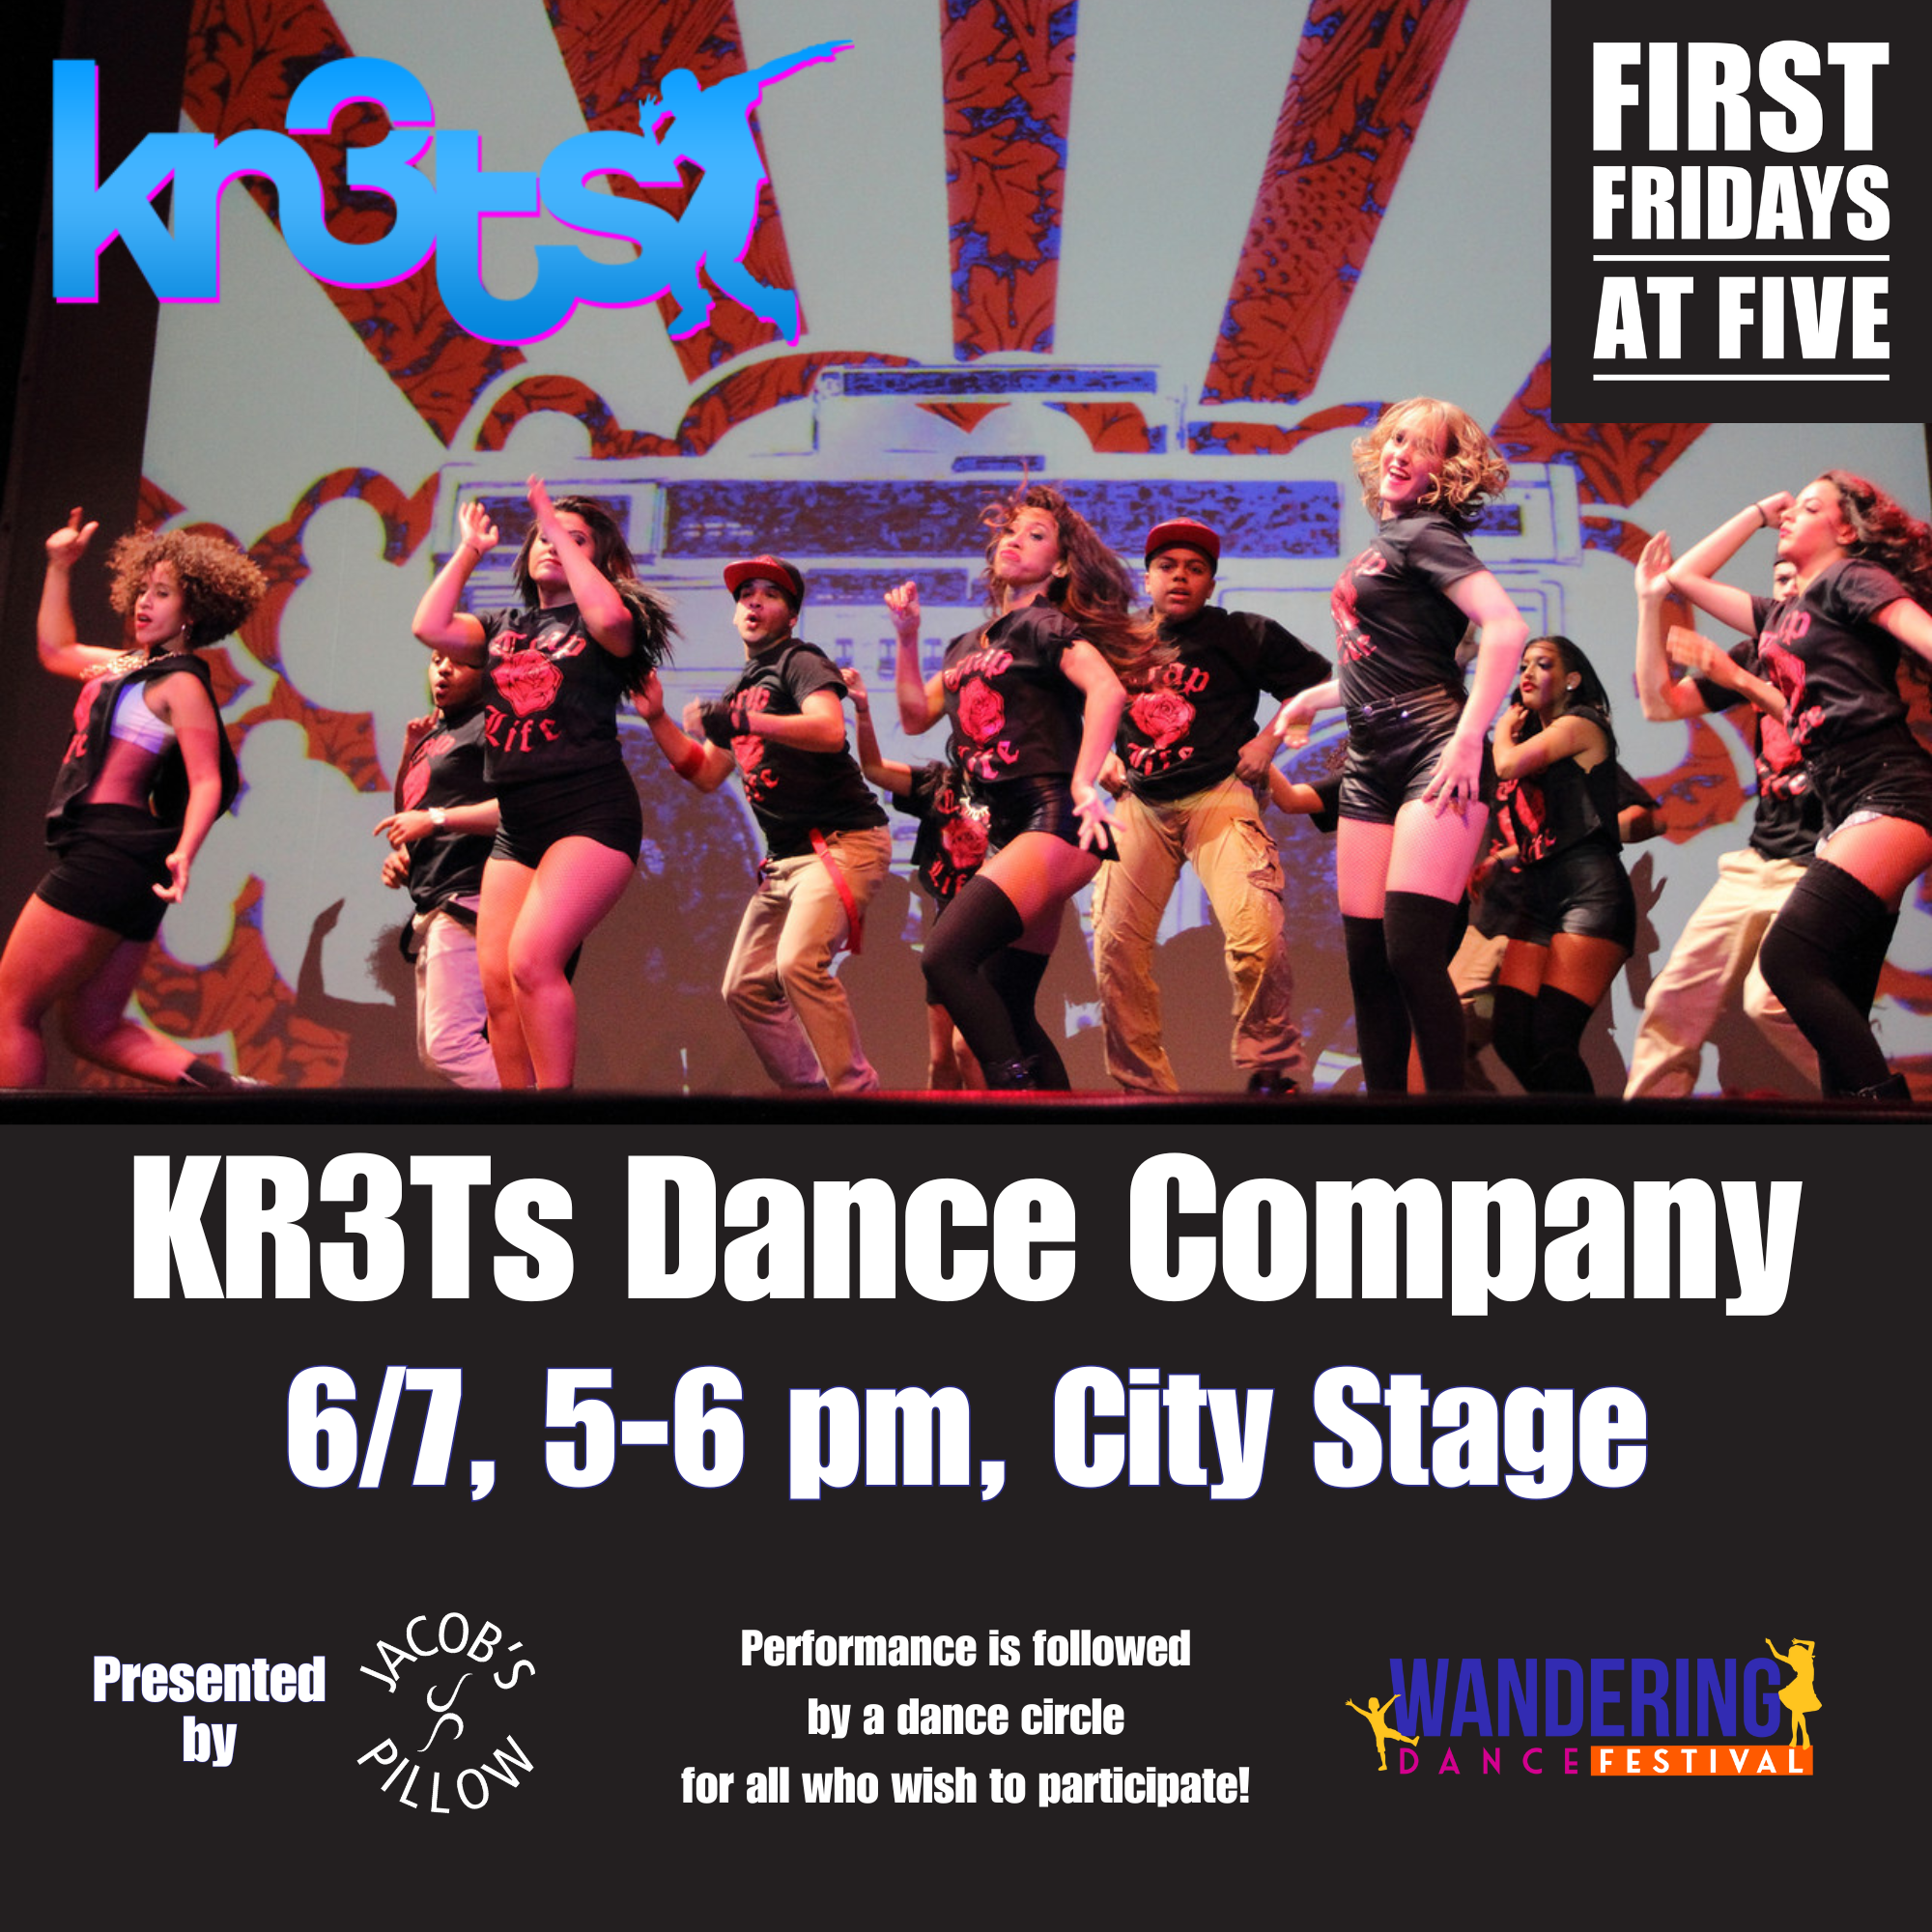 Performance by KR3T’s Dance Company and Dance Circle with Wandering Dance Society